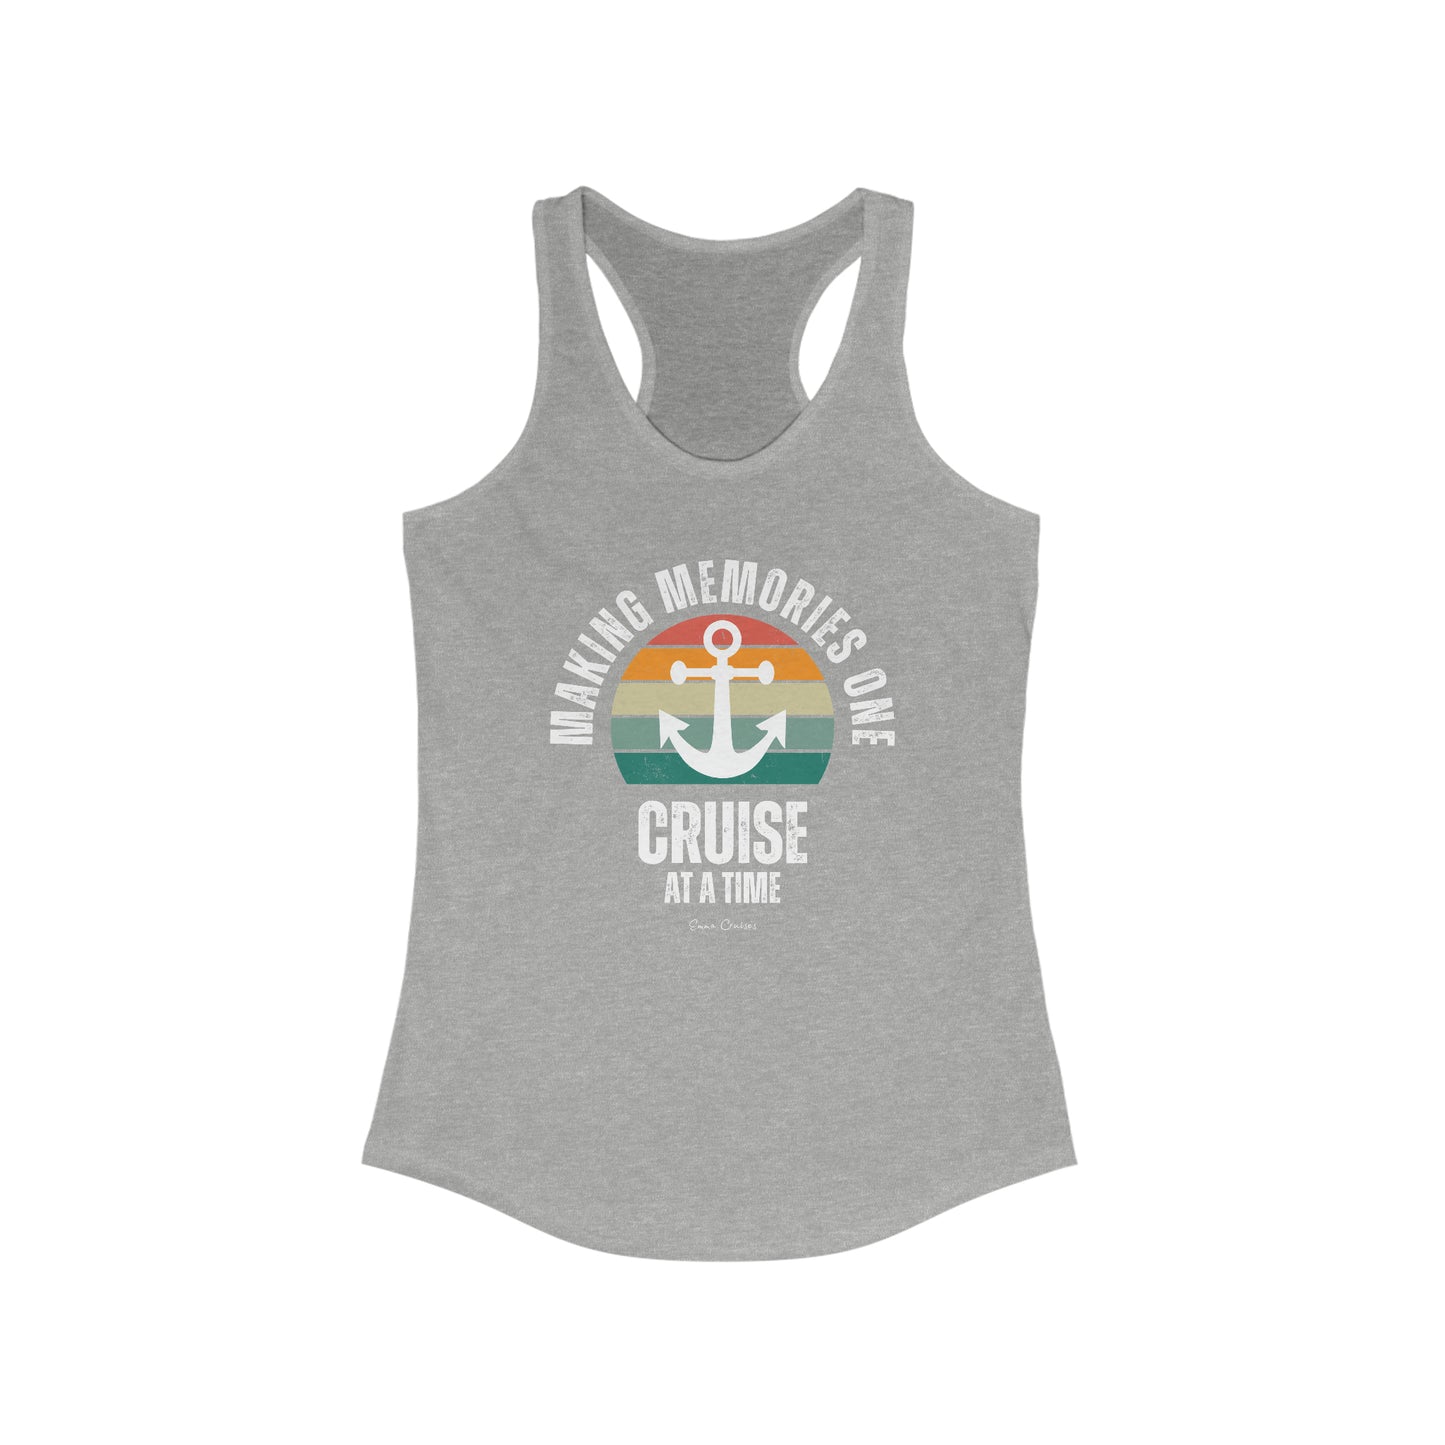 Making Memories One Cruise at a Time - Tank Top